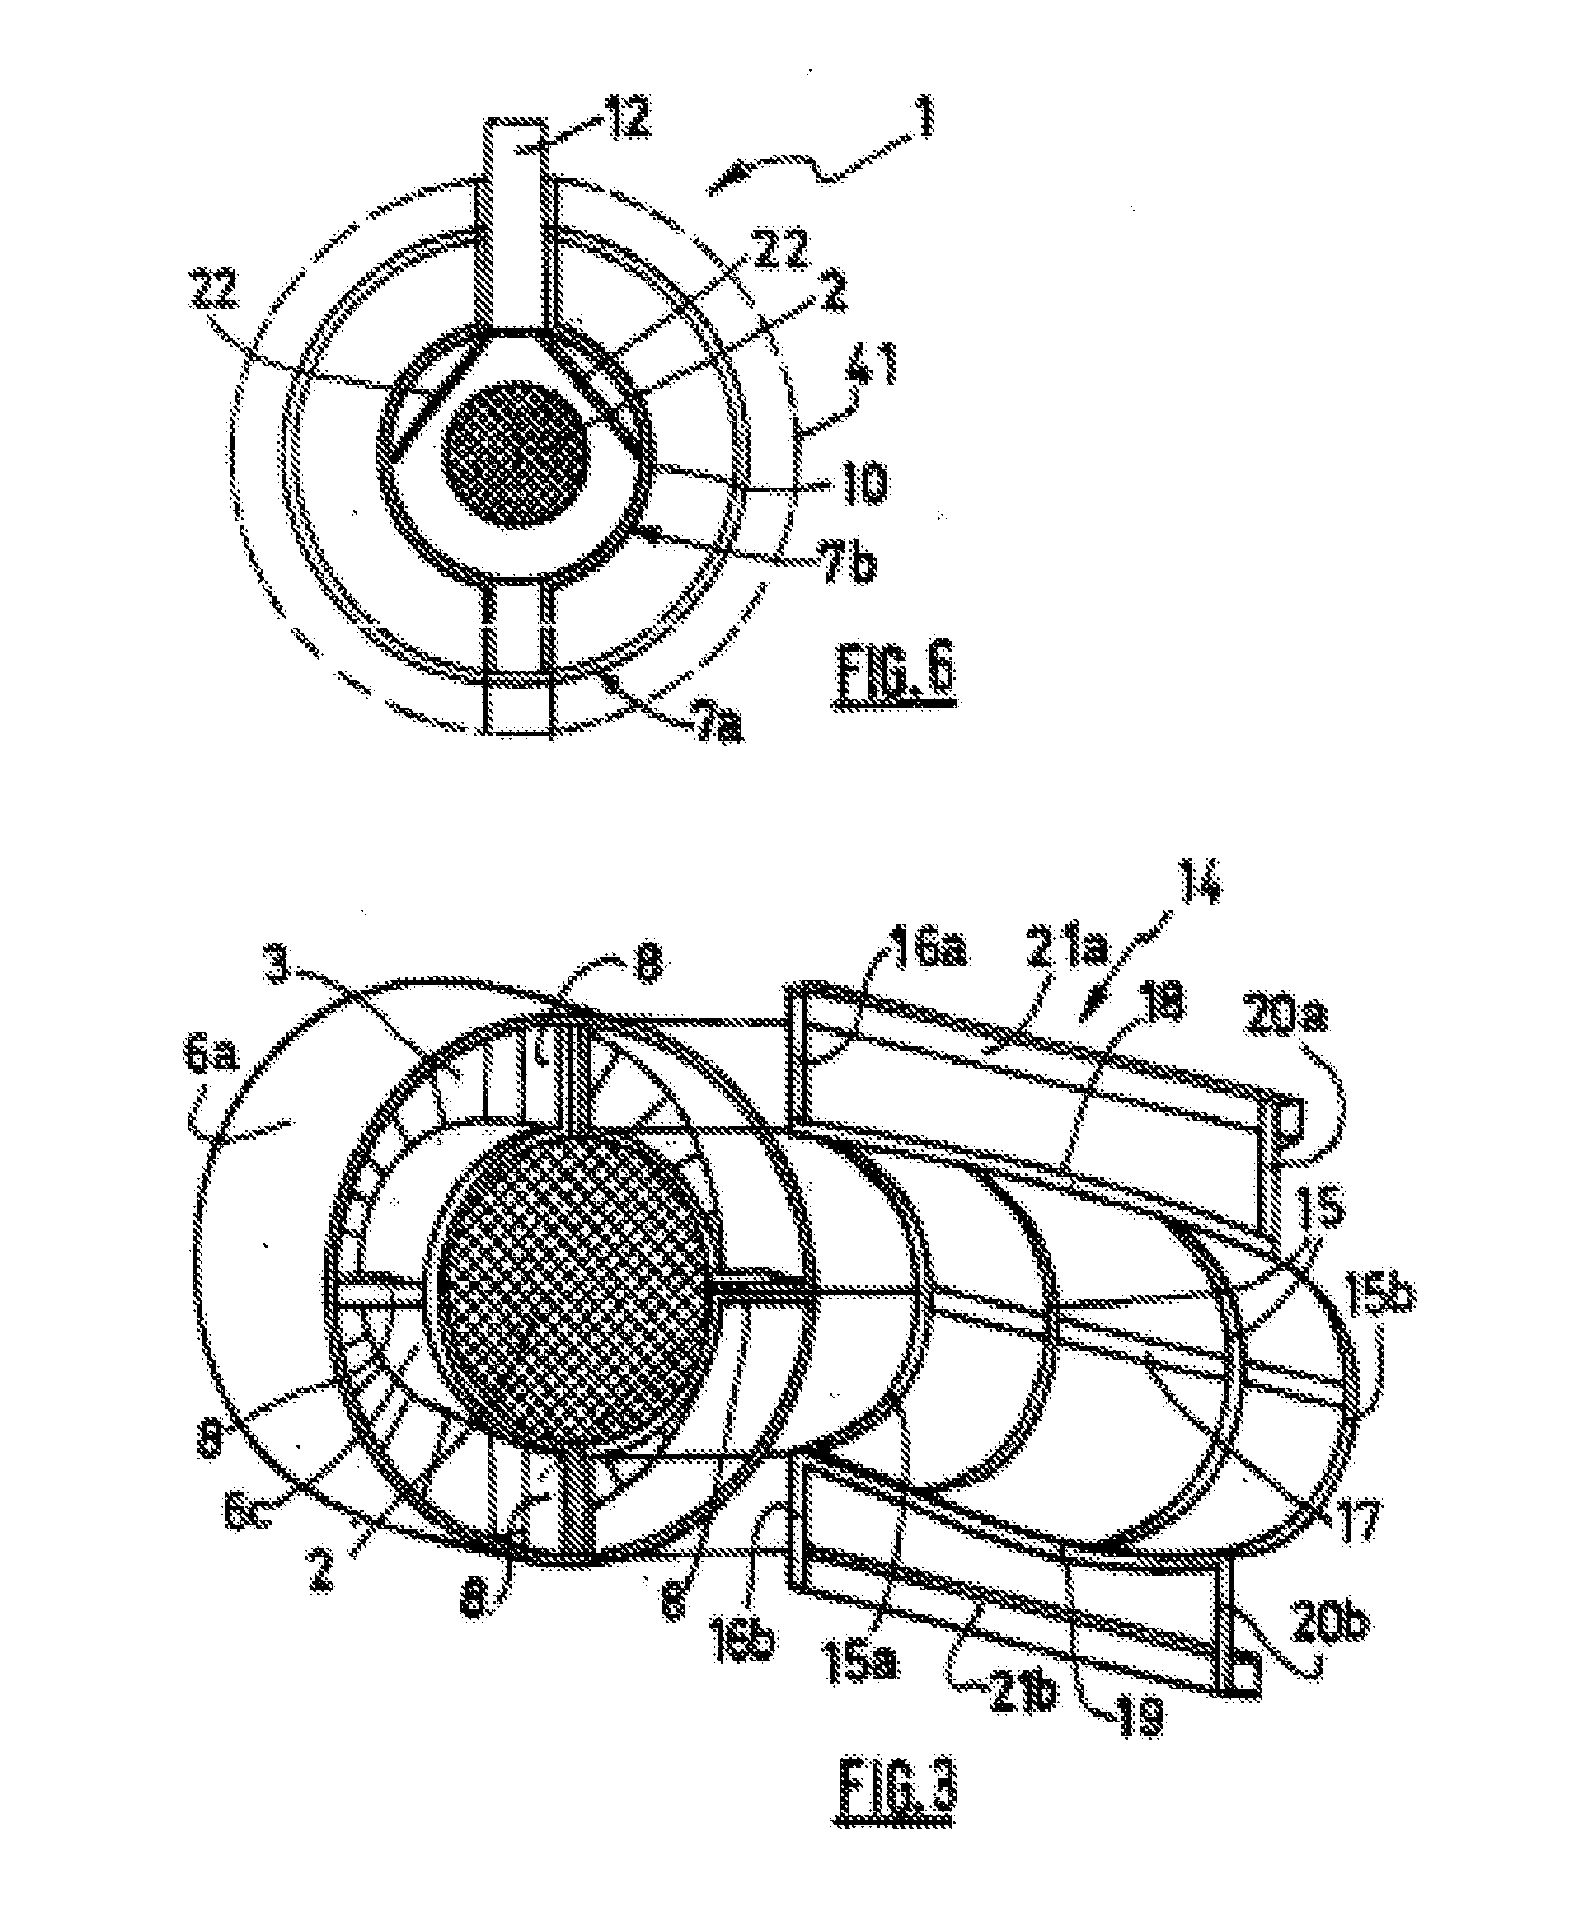 Structural nacelle